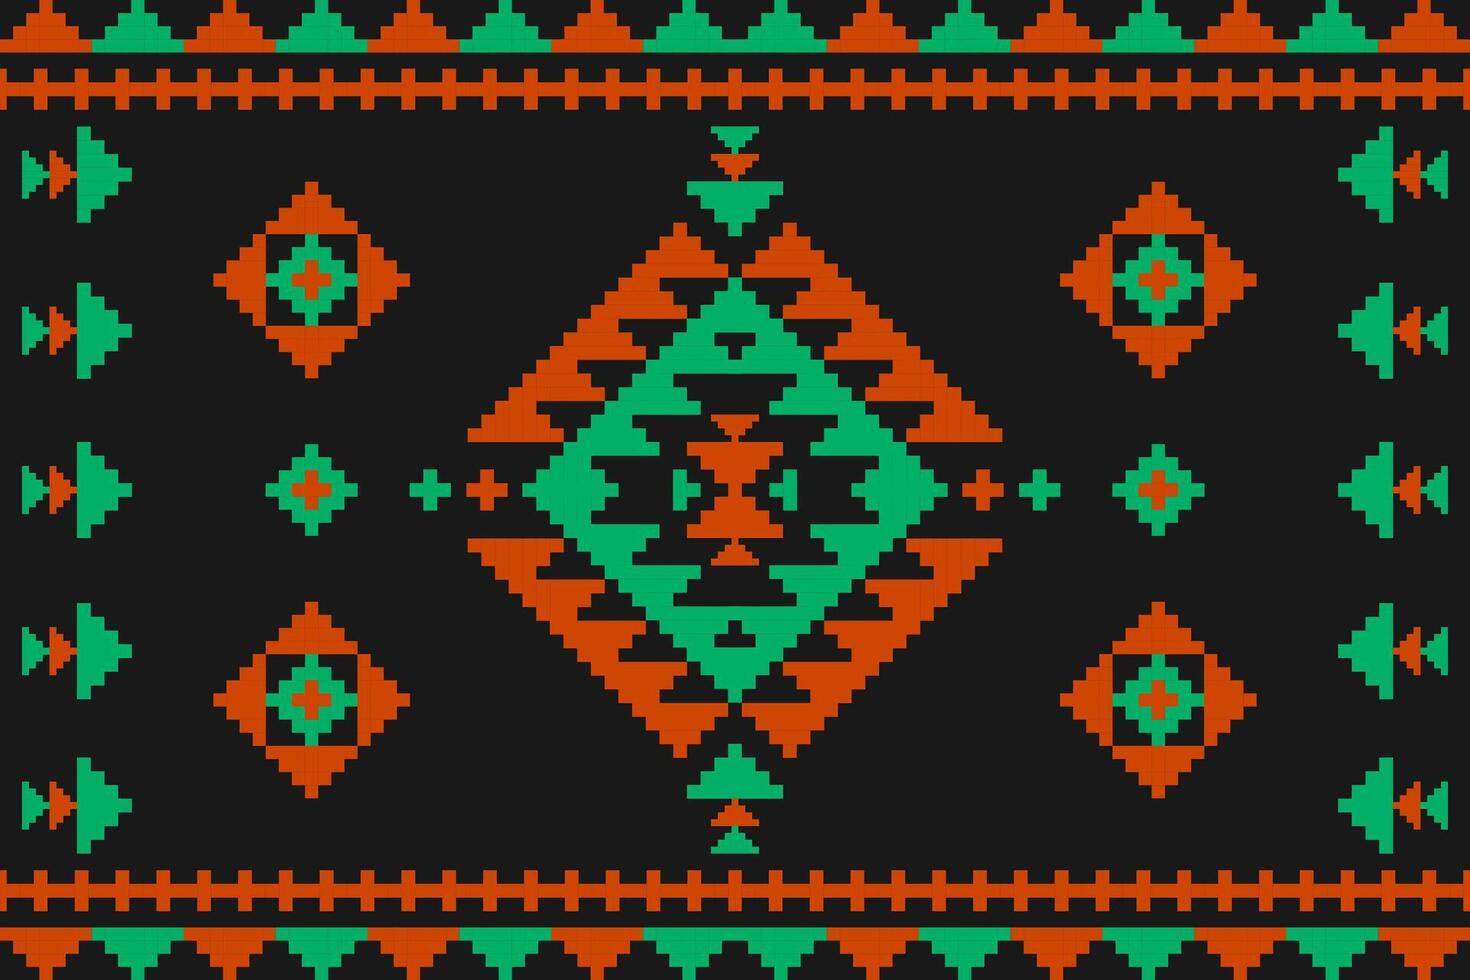 Carpet tribal pattern art. Geometric ethnic seamless pattern traditional. American, Mexican style. Design for background, wallpaper, illustration, fabric, clothing, carpet, textile, batik, embroidery. vector